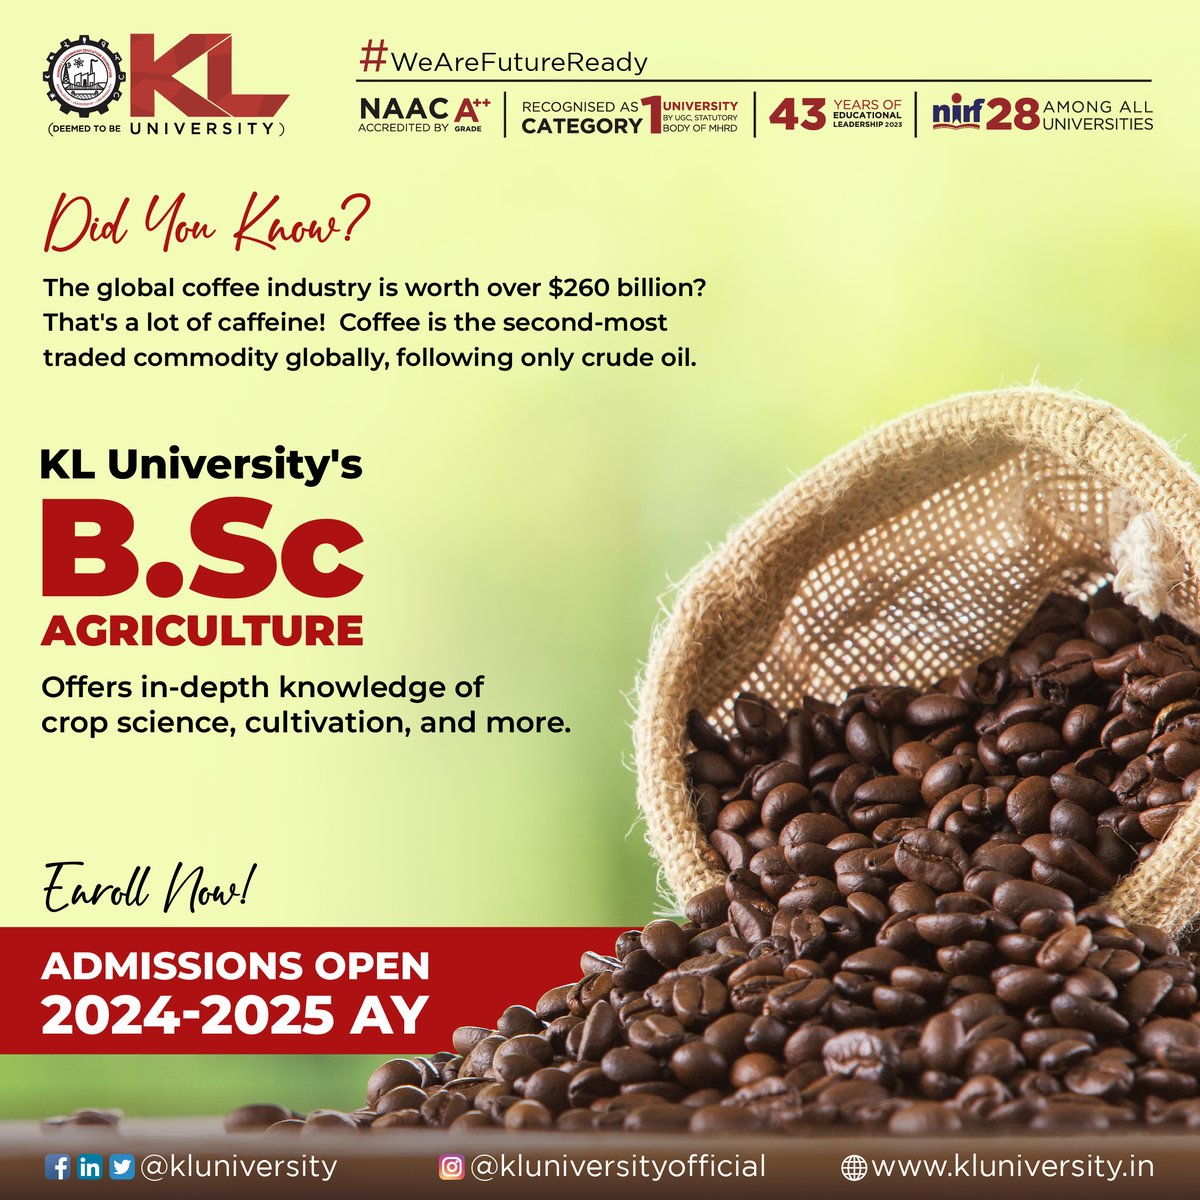 BSc Agriculture at KL University may lead to a serious case of 'coffeepreneur' dreams!   Learn about sustainable practices & become a coffee industry game-changer.  

Apply Now: kluniversity.in/admissions-202…

#KLuniversity #KLU #Admissions2024 #WeAreFutureReady  #BSC #Agriculture